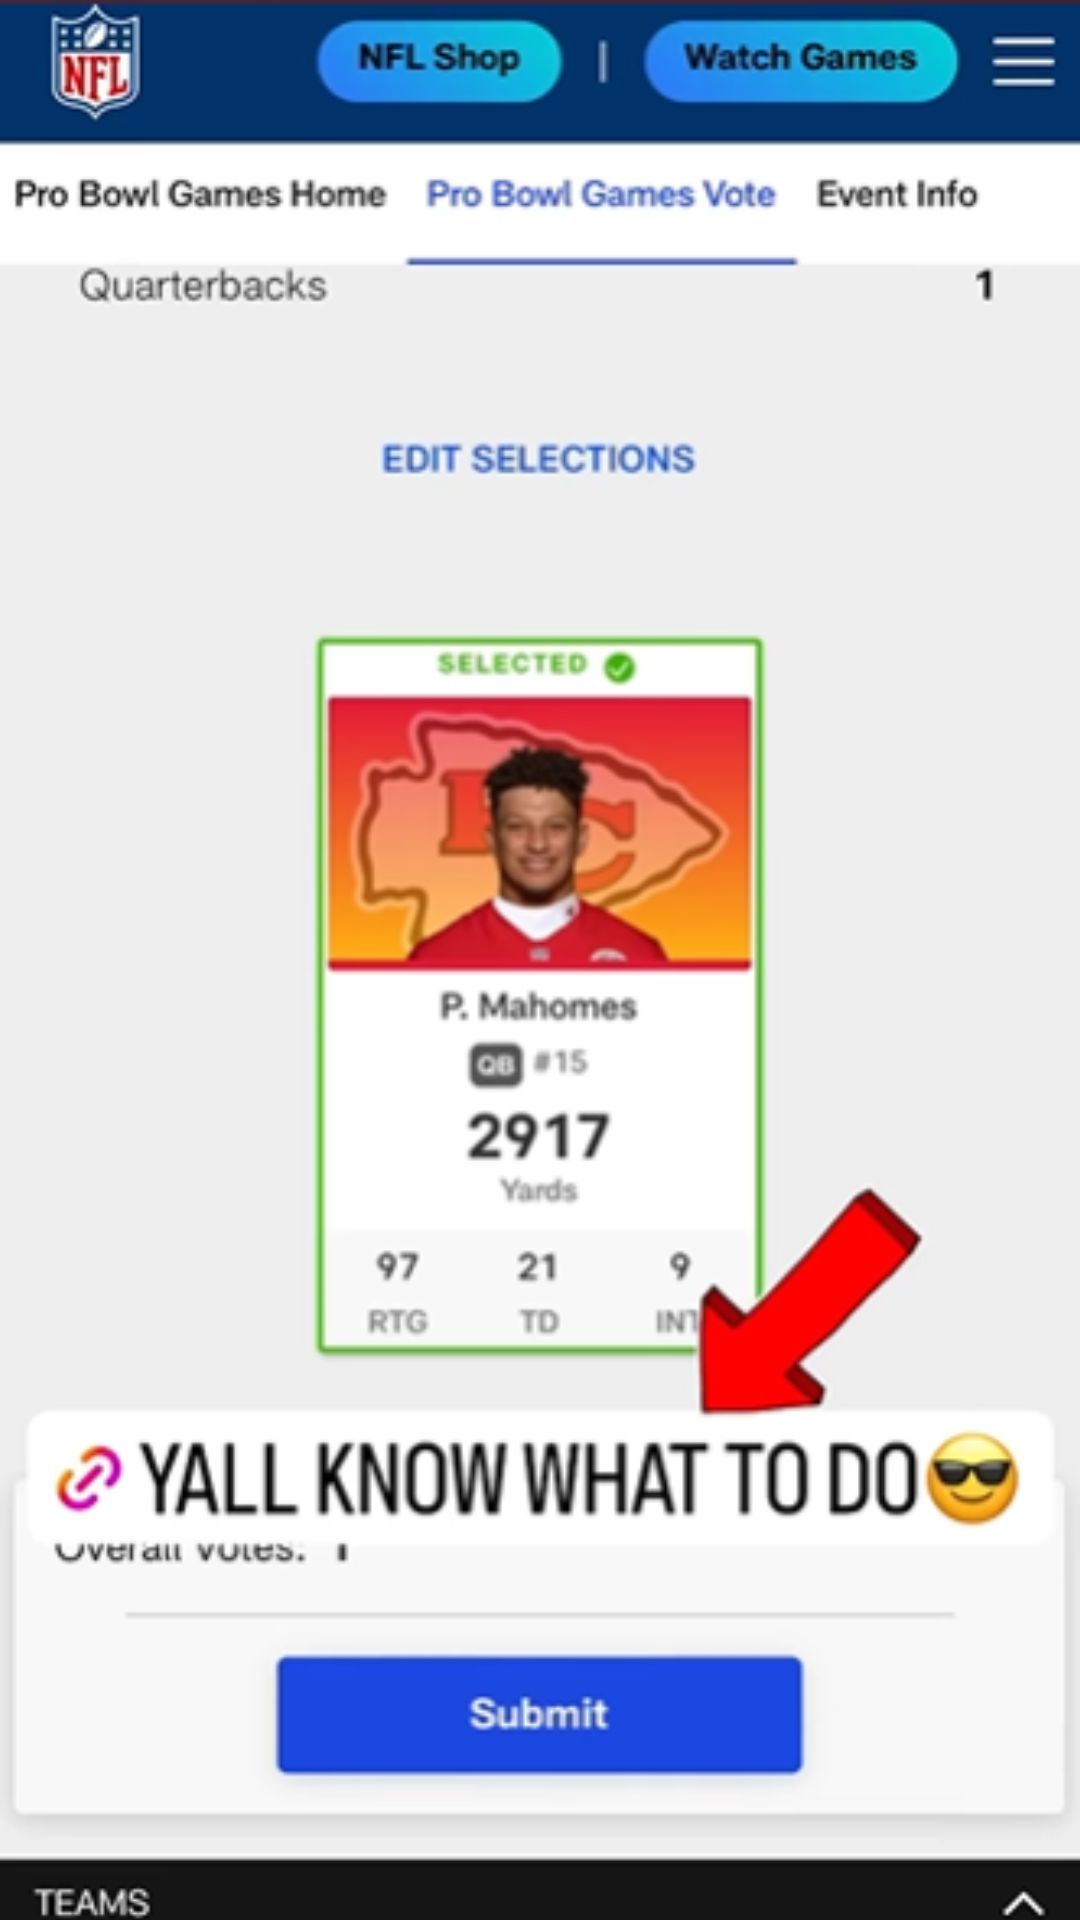 Brittany Mahomes unnecessarily spams link to vote Patrick into Pro Bowl